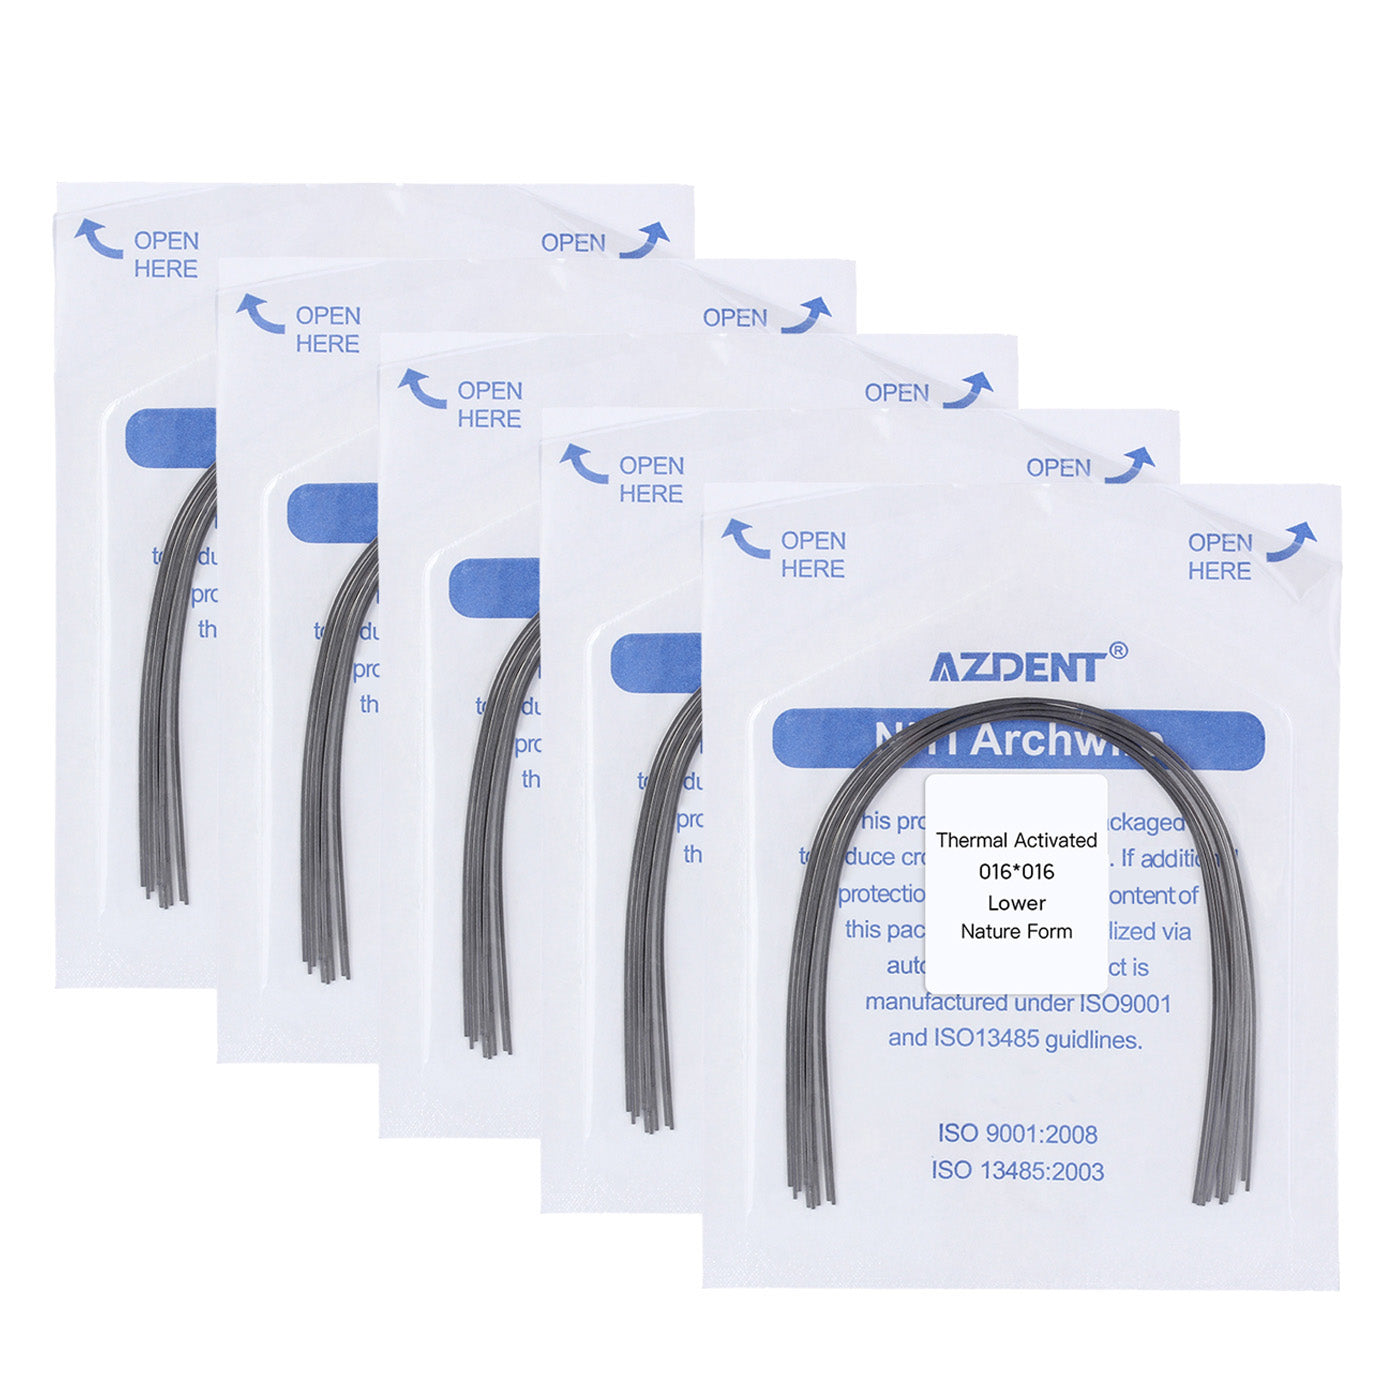 5 Packs AZDENT Thermal Active NiTi Archwire Natural Form Rectangular 0.016 x 0.016 Lower 10pcs/Pack - azdentall.com